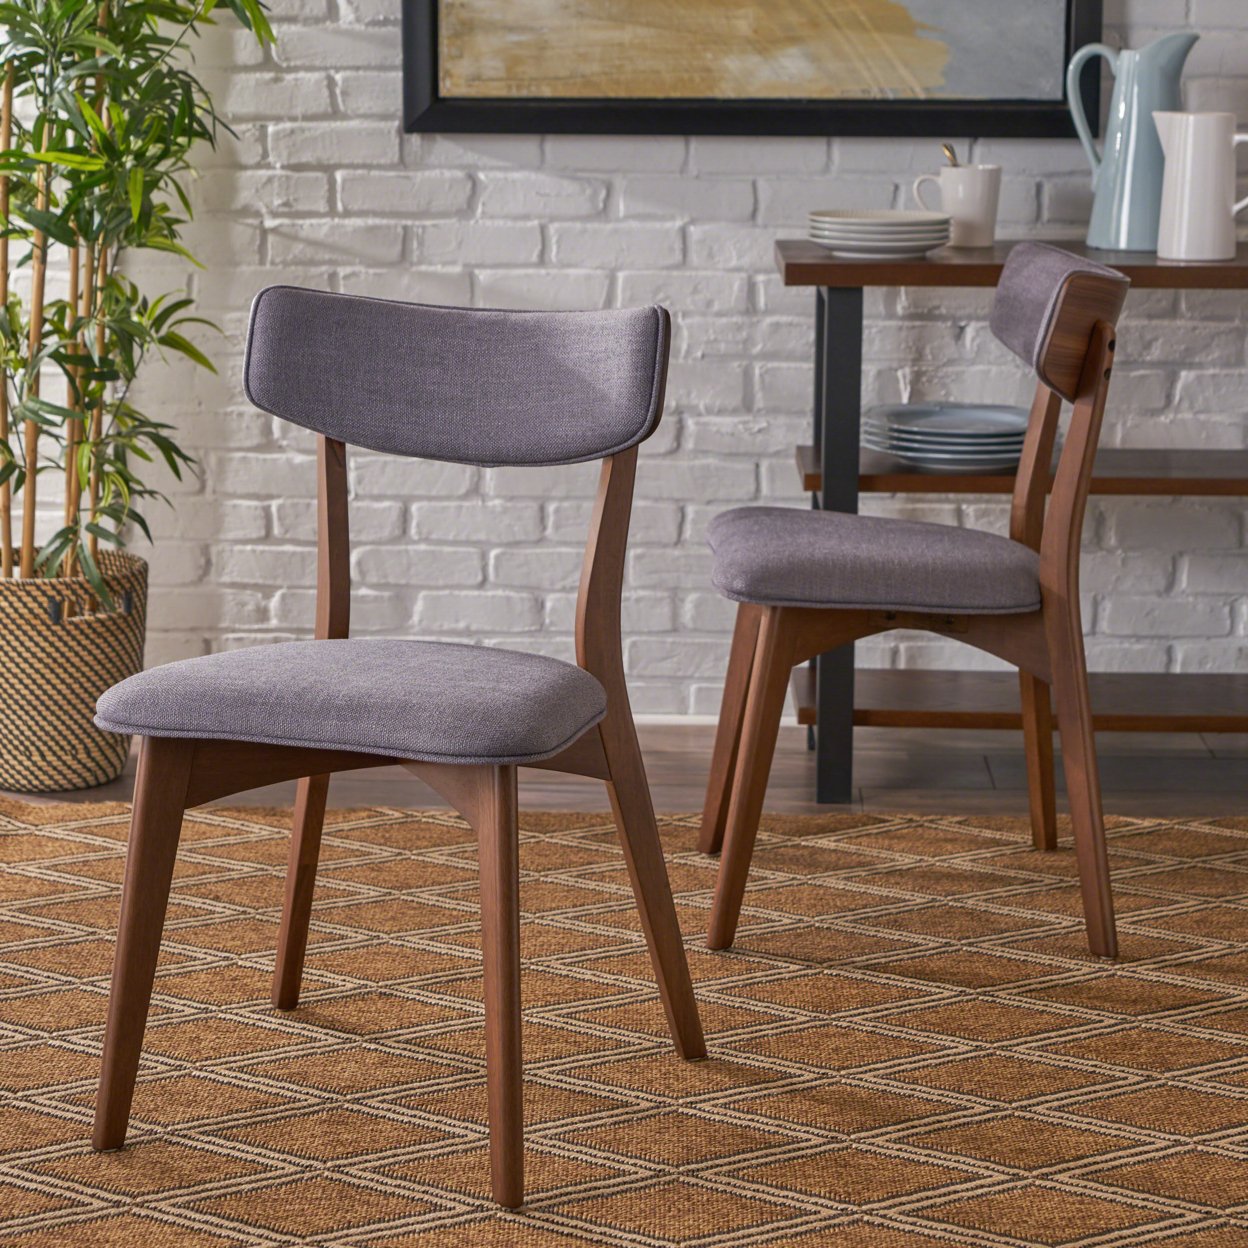 Molly Mid Century Modern Dining Chairs With Rubberwood Frame (Set Of 2) - Dark Gray/Natural Oak